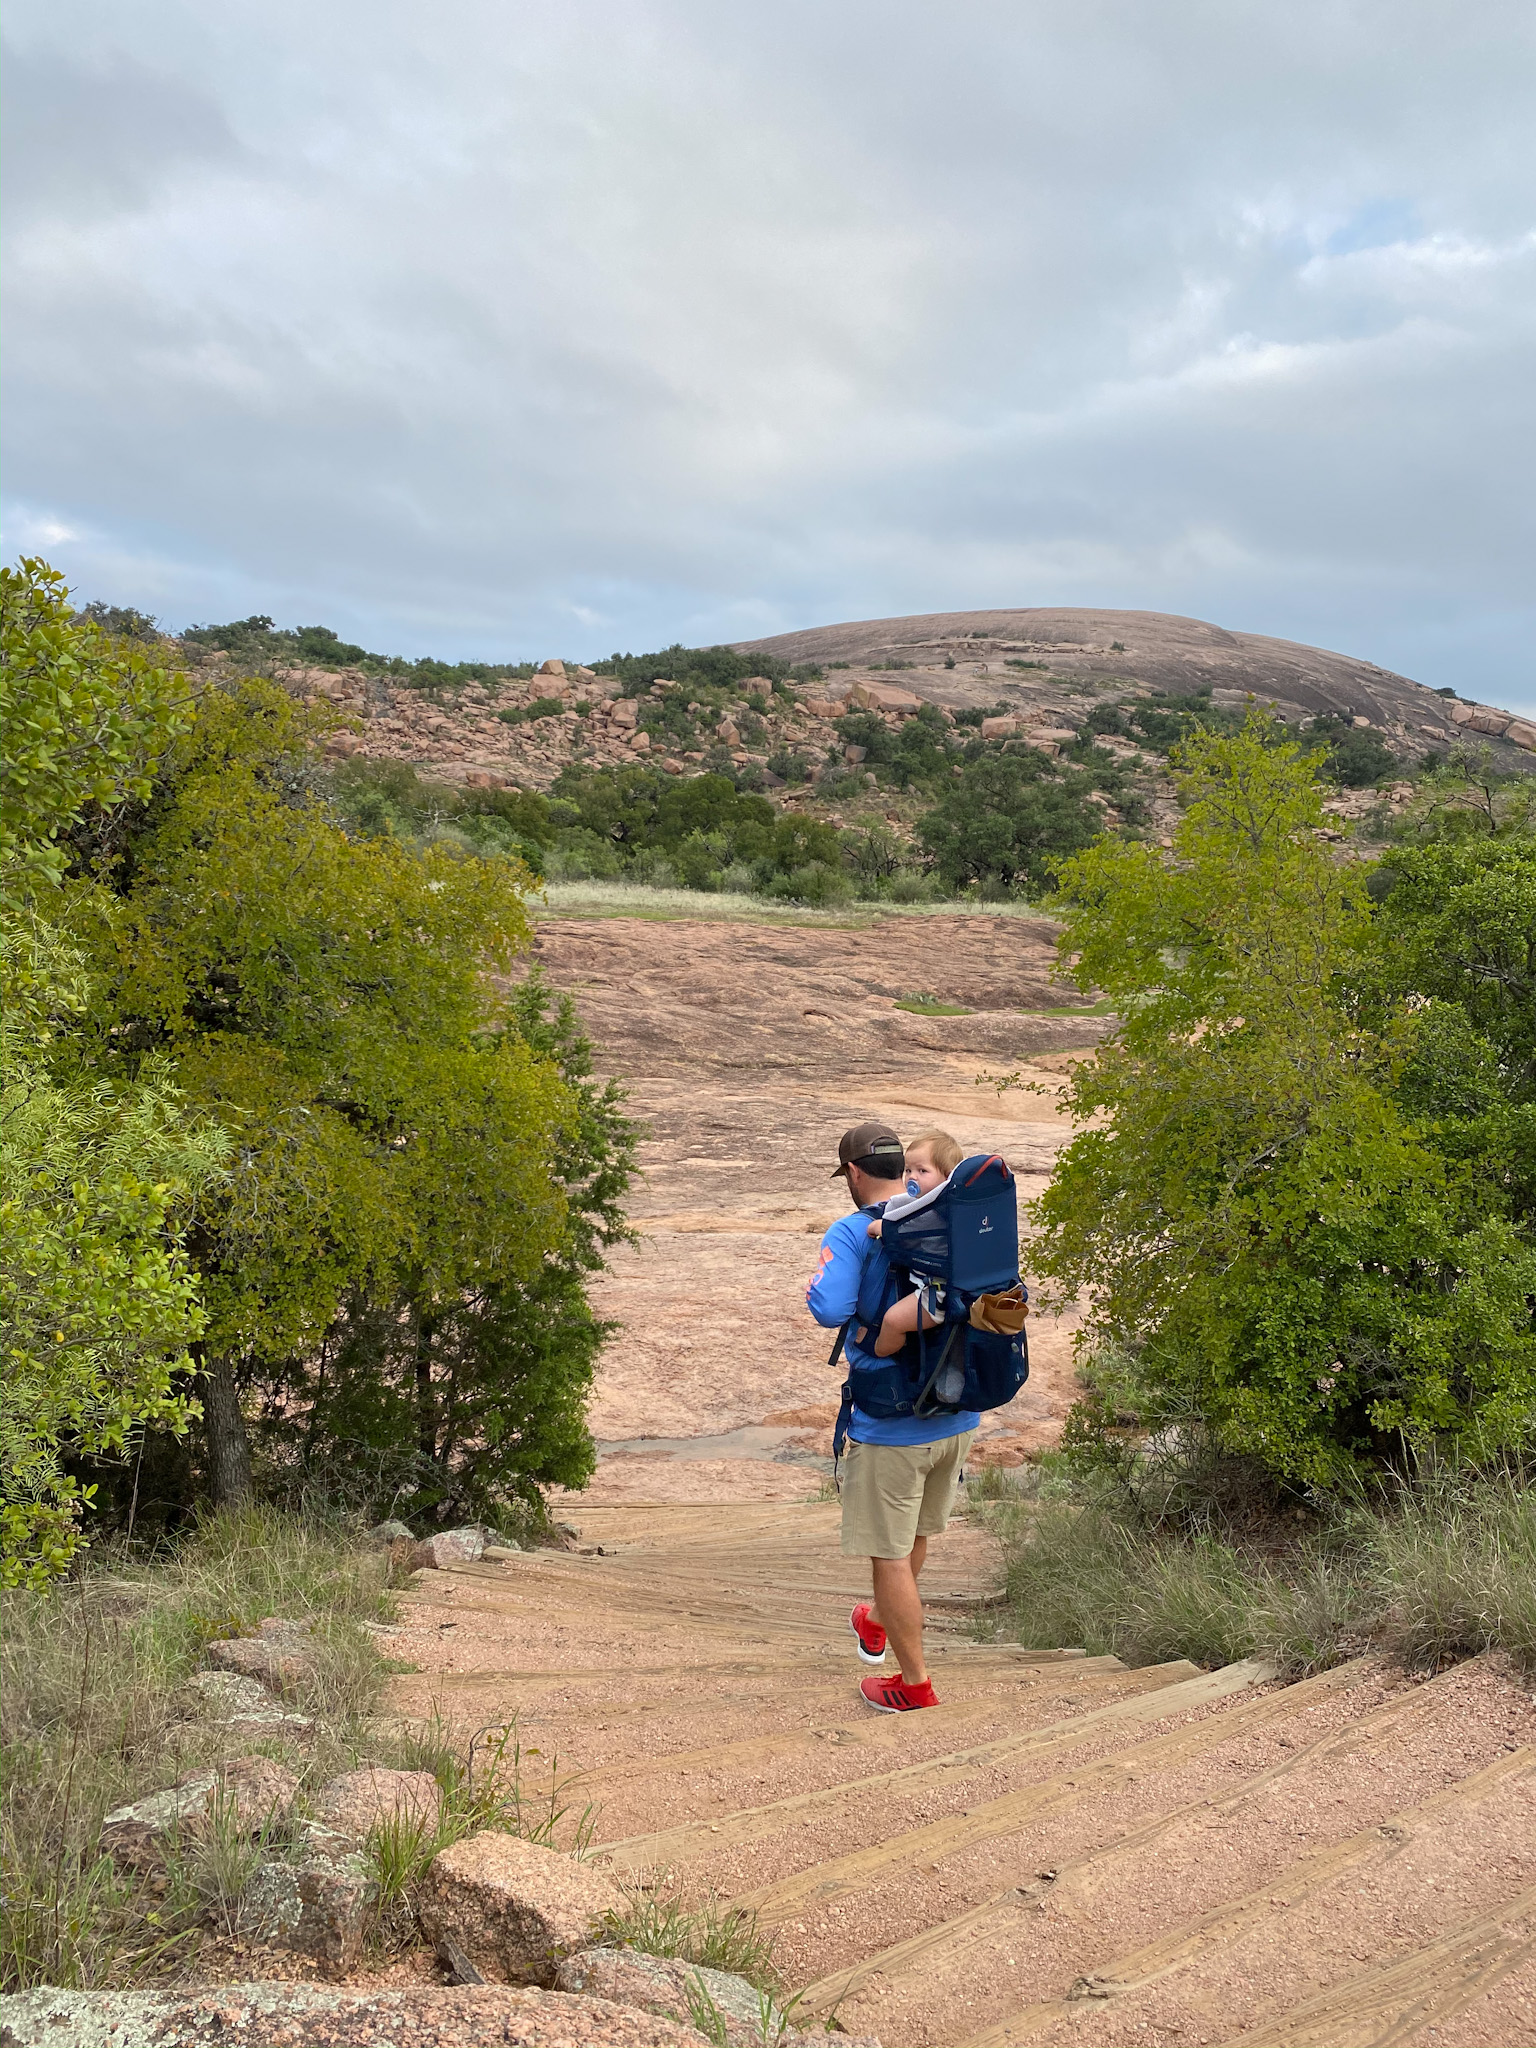 Enchanted Rock Hike <h2> Texas Hill Country <h2/>